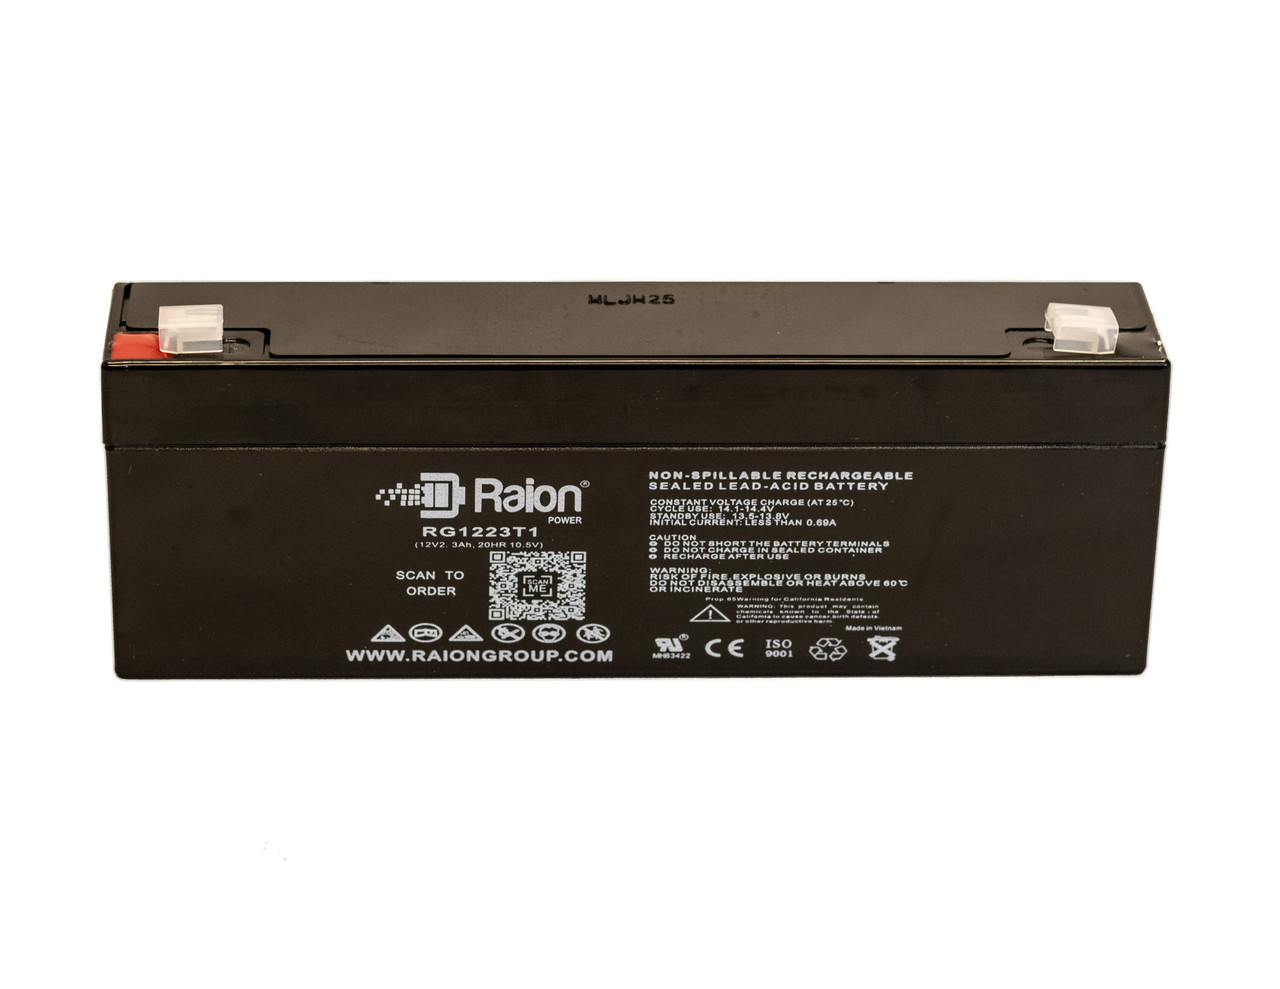 Raion Power 12V 2.3Ah SLA Battery With T1 Terminals For Life Science LS14 Monitor